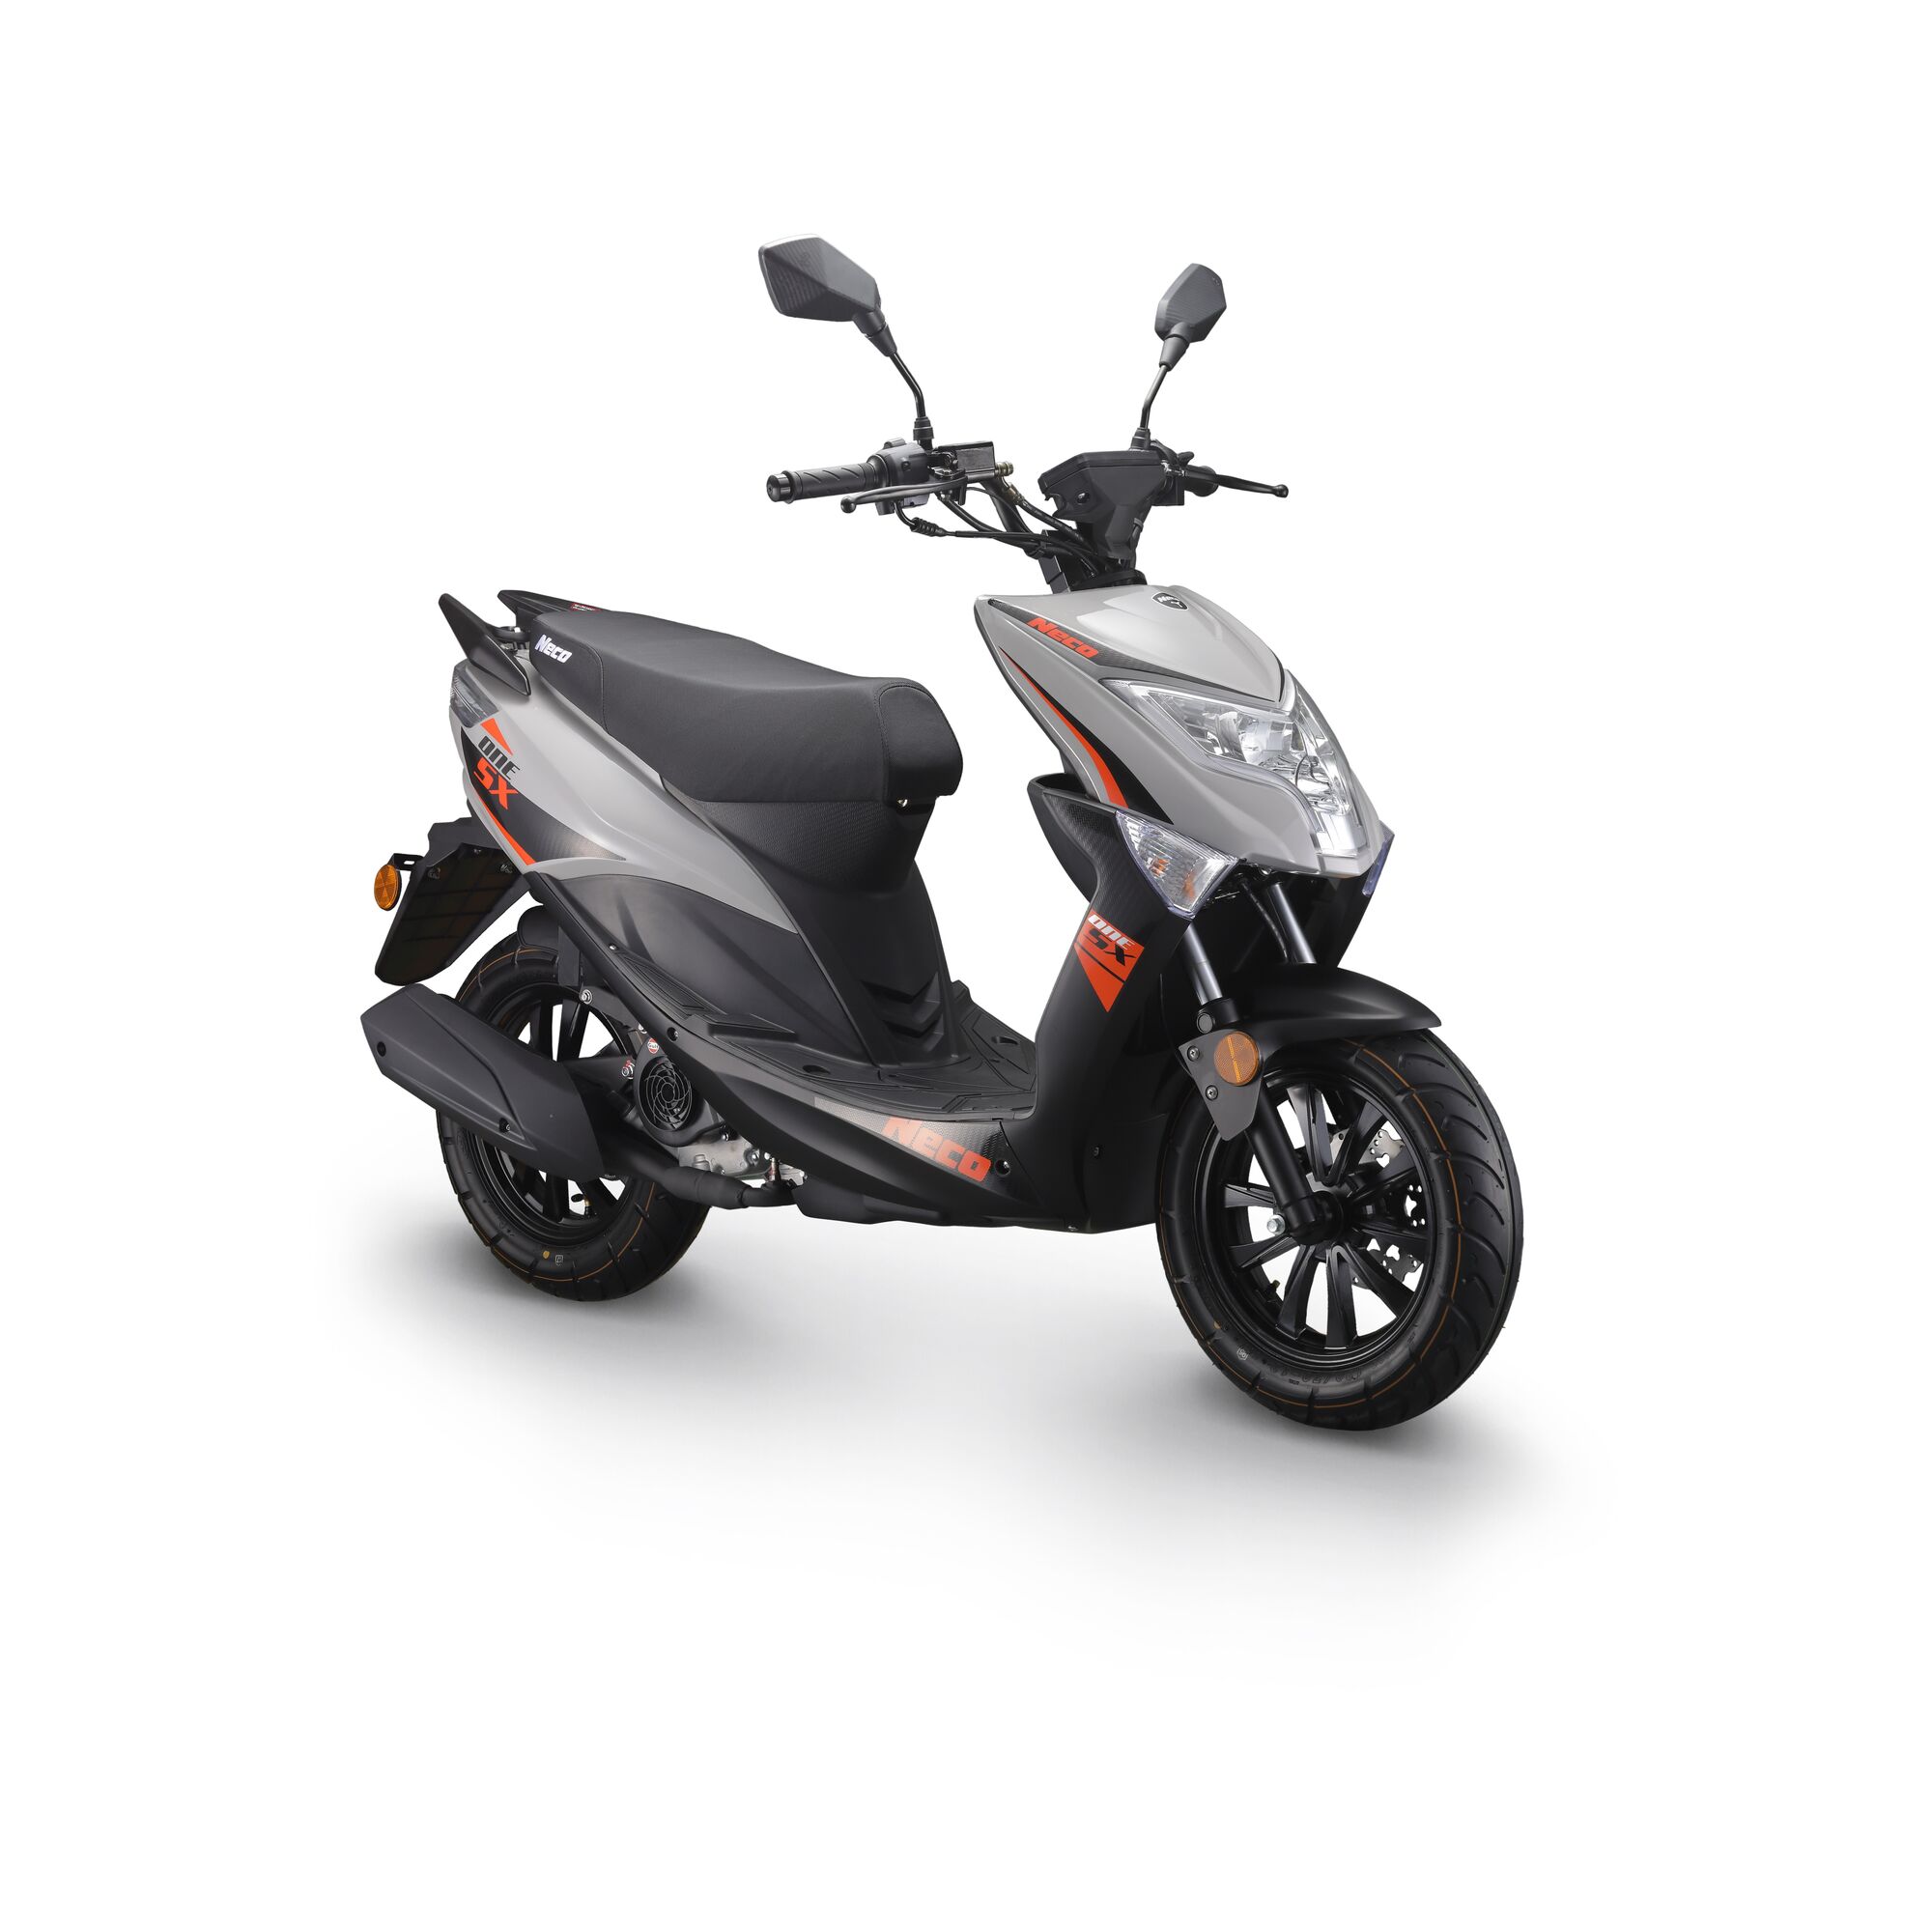 PEUGEOT Kisbee 50 Active 2024 :: £2185.00 :: Motorcycles & Scooters :: 50cc  MOPEDS :: WHATEVERWHEELS LTD - ATV, Motorbike & Scooter Centre -  Lancashire's Best For Quad, Buggy, 50cc & 125cc Motorcycle and Moped Sale